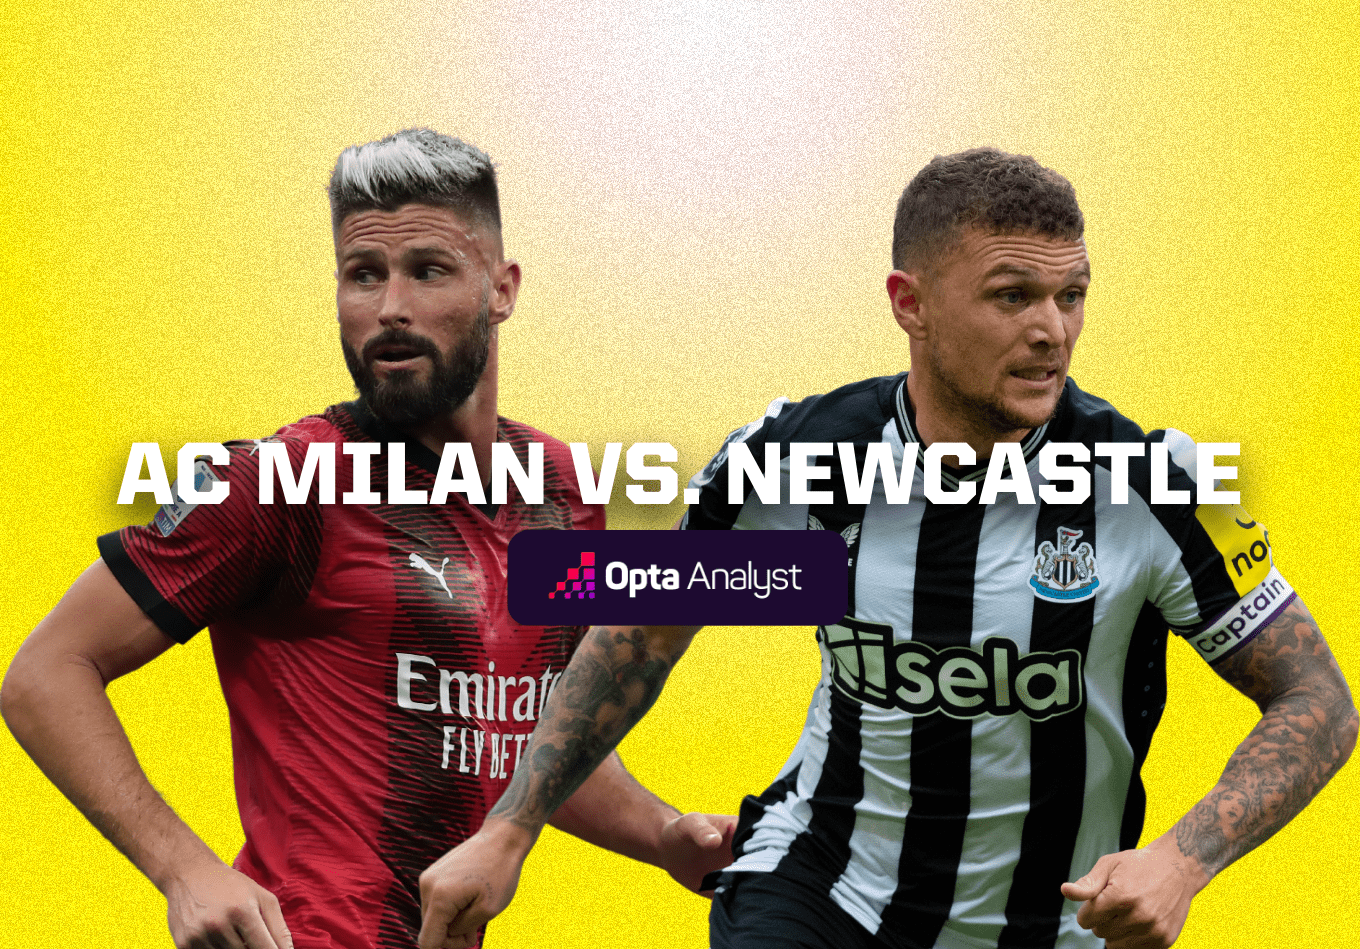 AC Milan vs Newcastle United: Prediction and Preview | The Analyst